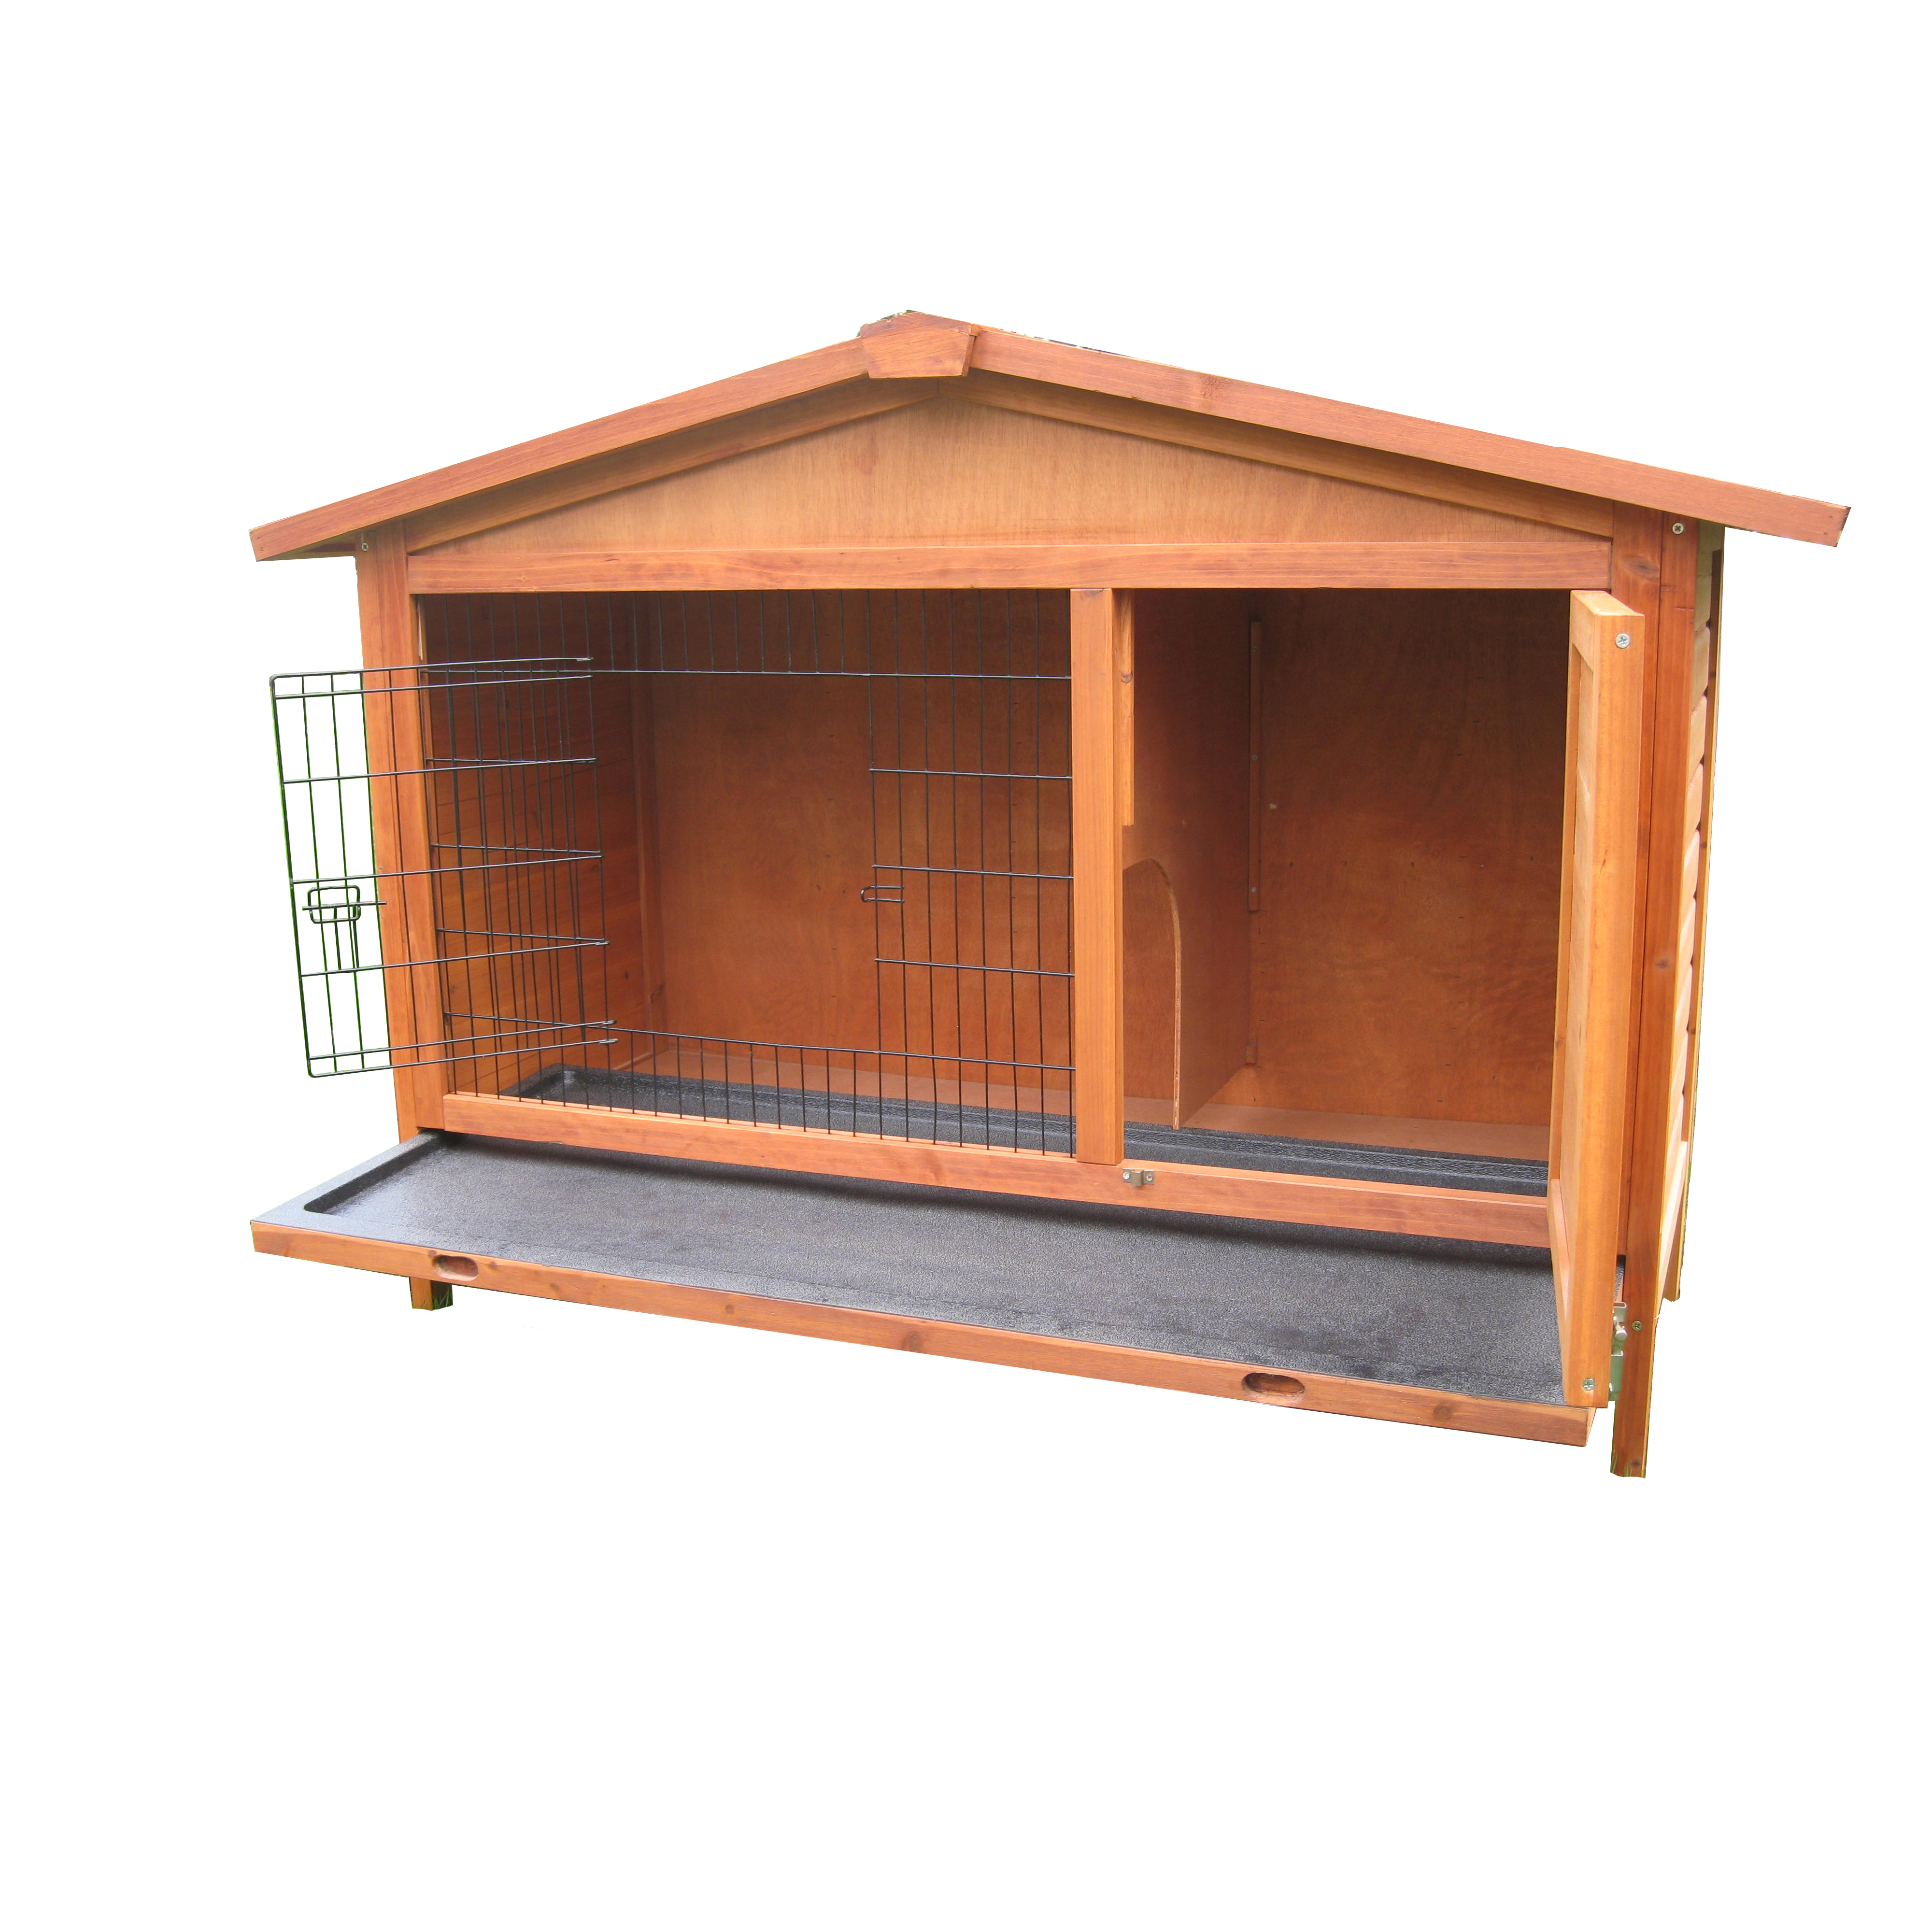 China New Product Lucky Dog Kennel -
 fir wood easy assembled eco friendly outdoor Wooden Metal Floor Wood Rabbit Cage bunny house Sale – Easy